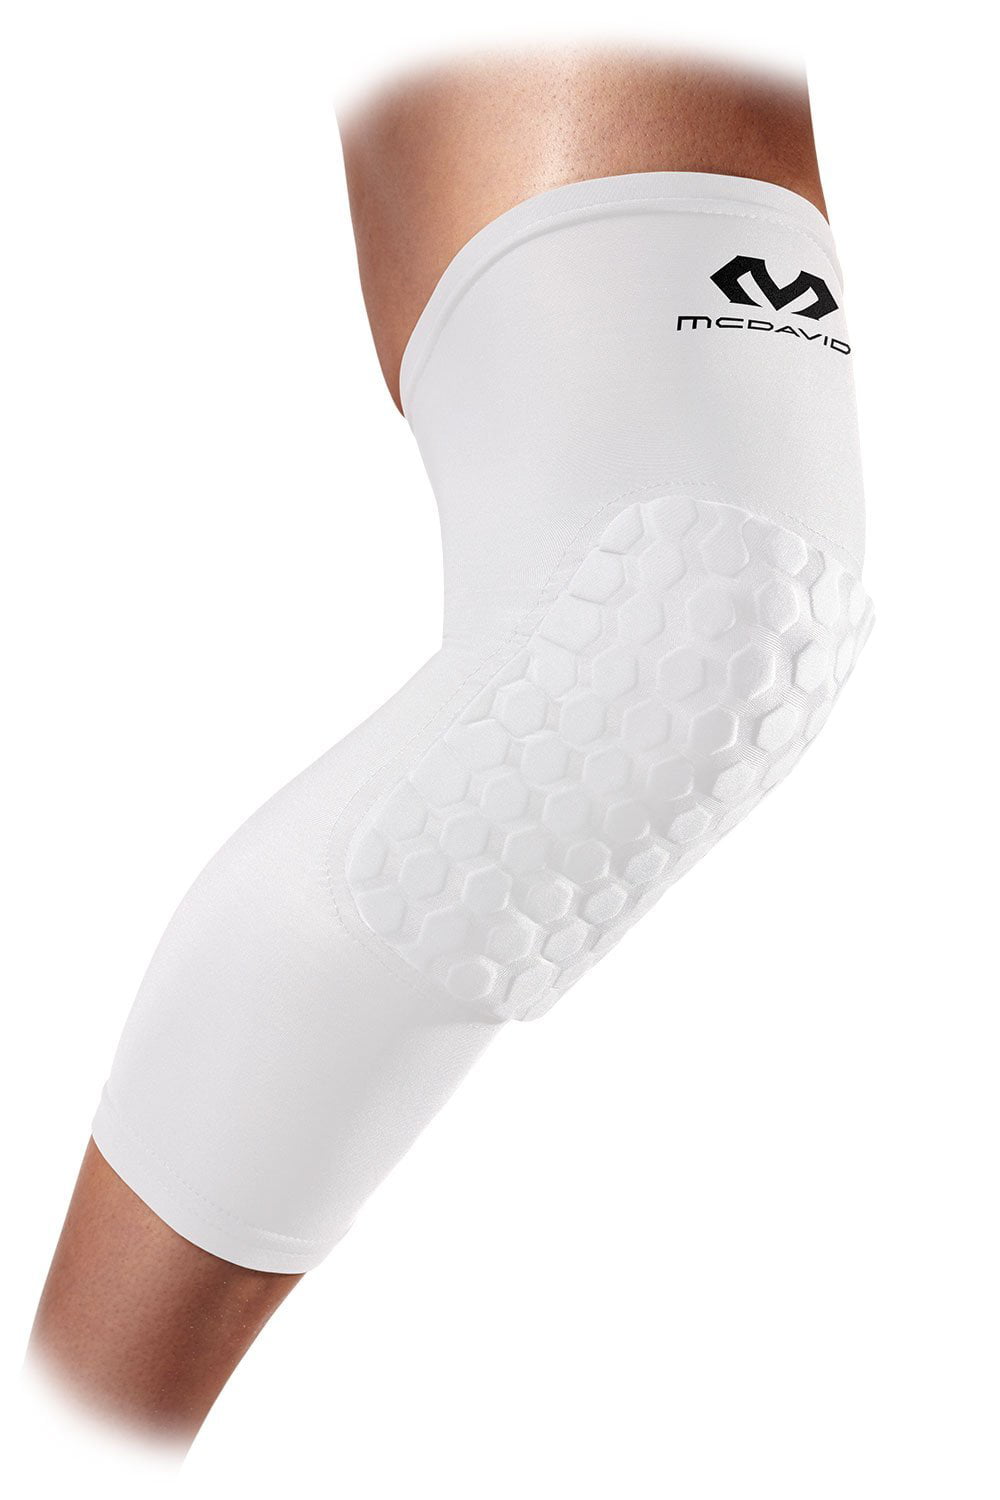 McDavid 645 Standard Knee and Elbow Pad Black Large Compression Sleeves Pair for sale online 